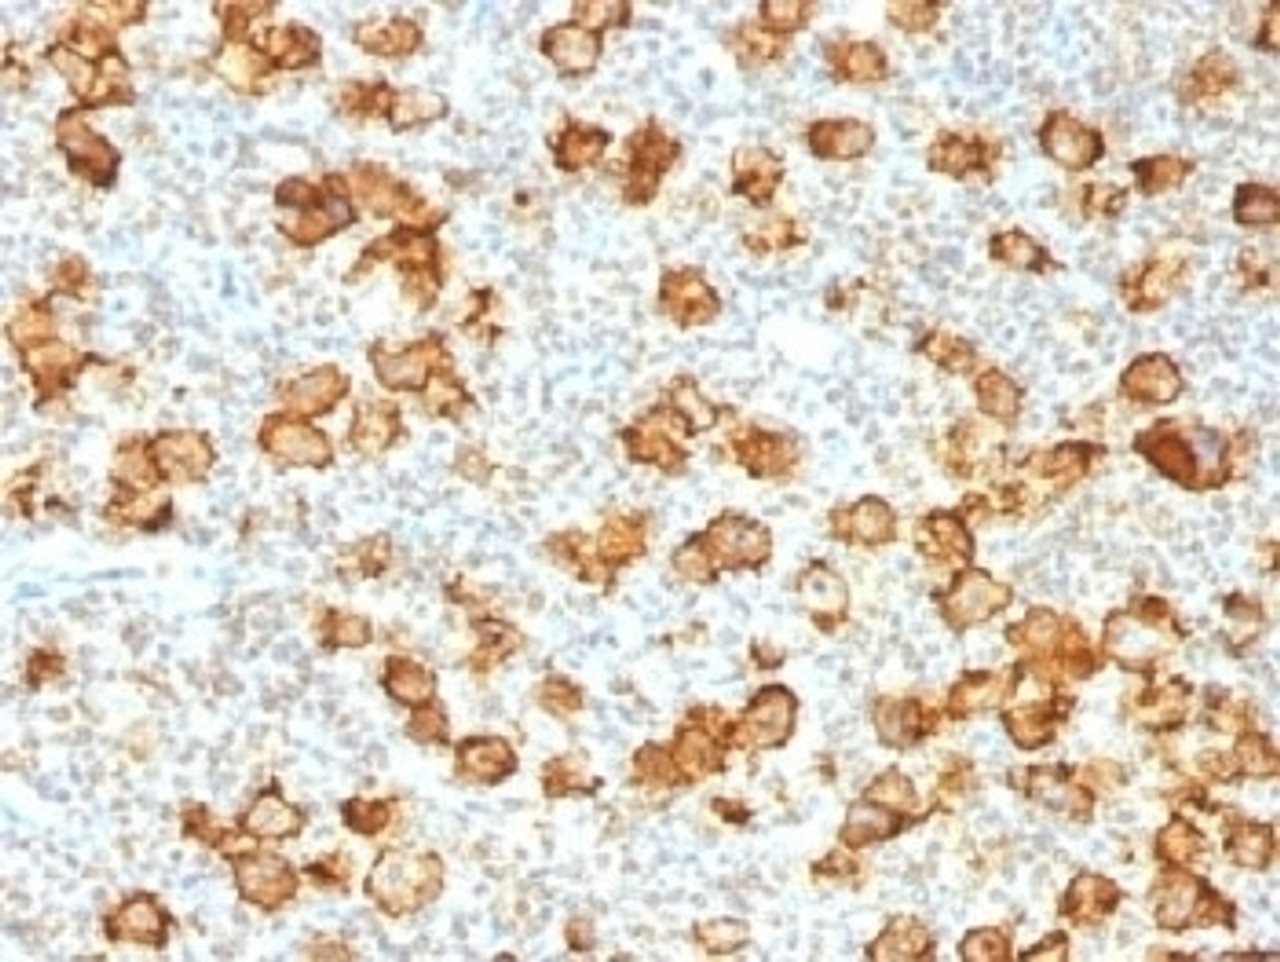 IHC testing of FFPE human Hodgkin's lymphoma stained with recombinant CD30 antibody (clone Ki-1/1505R) . Required HIER: steam sections in pH9, 1mM EDTA for 10-20 min.